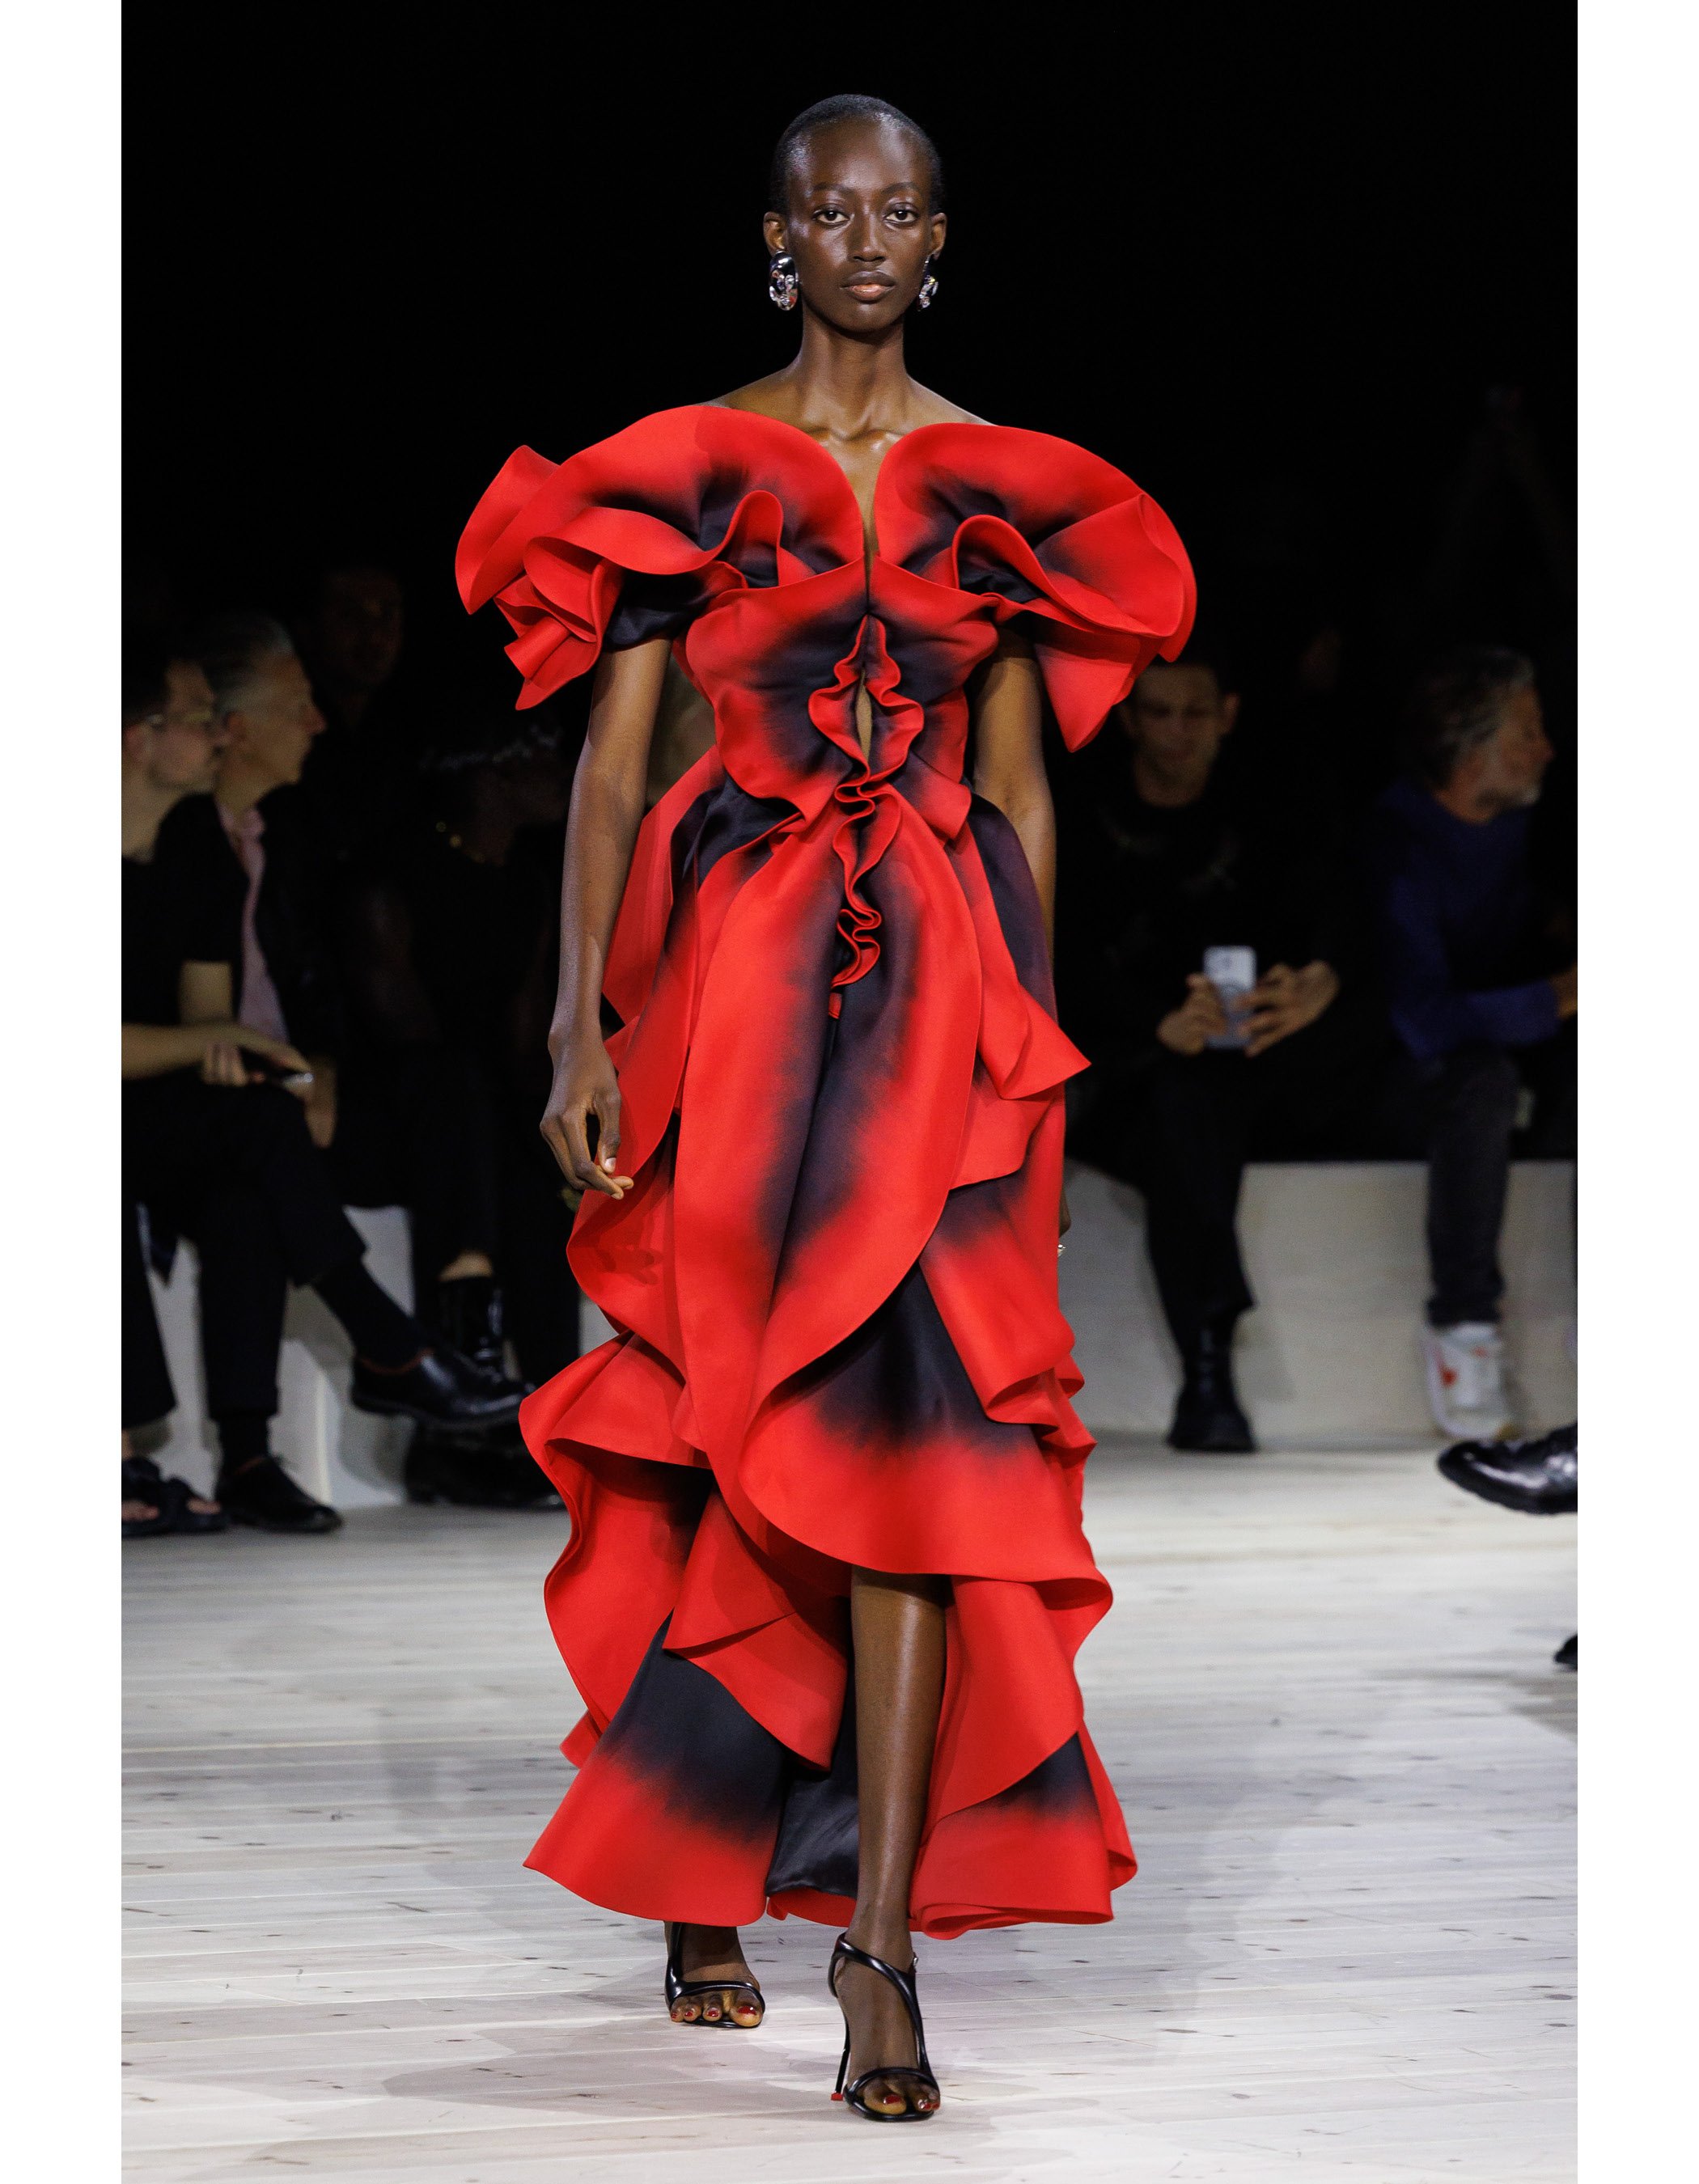 Alexander McQueen's Latest Collection Is a Beautiful Tribute to